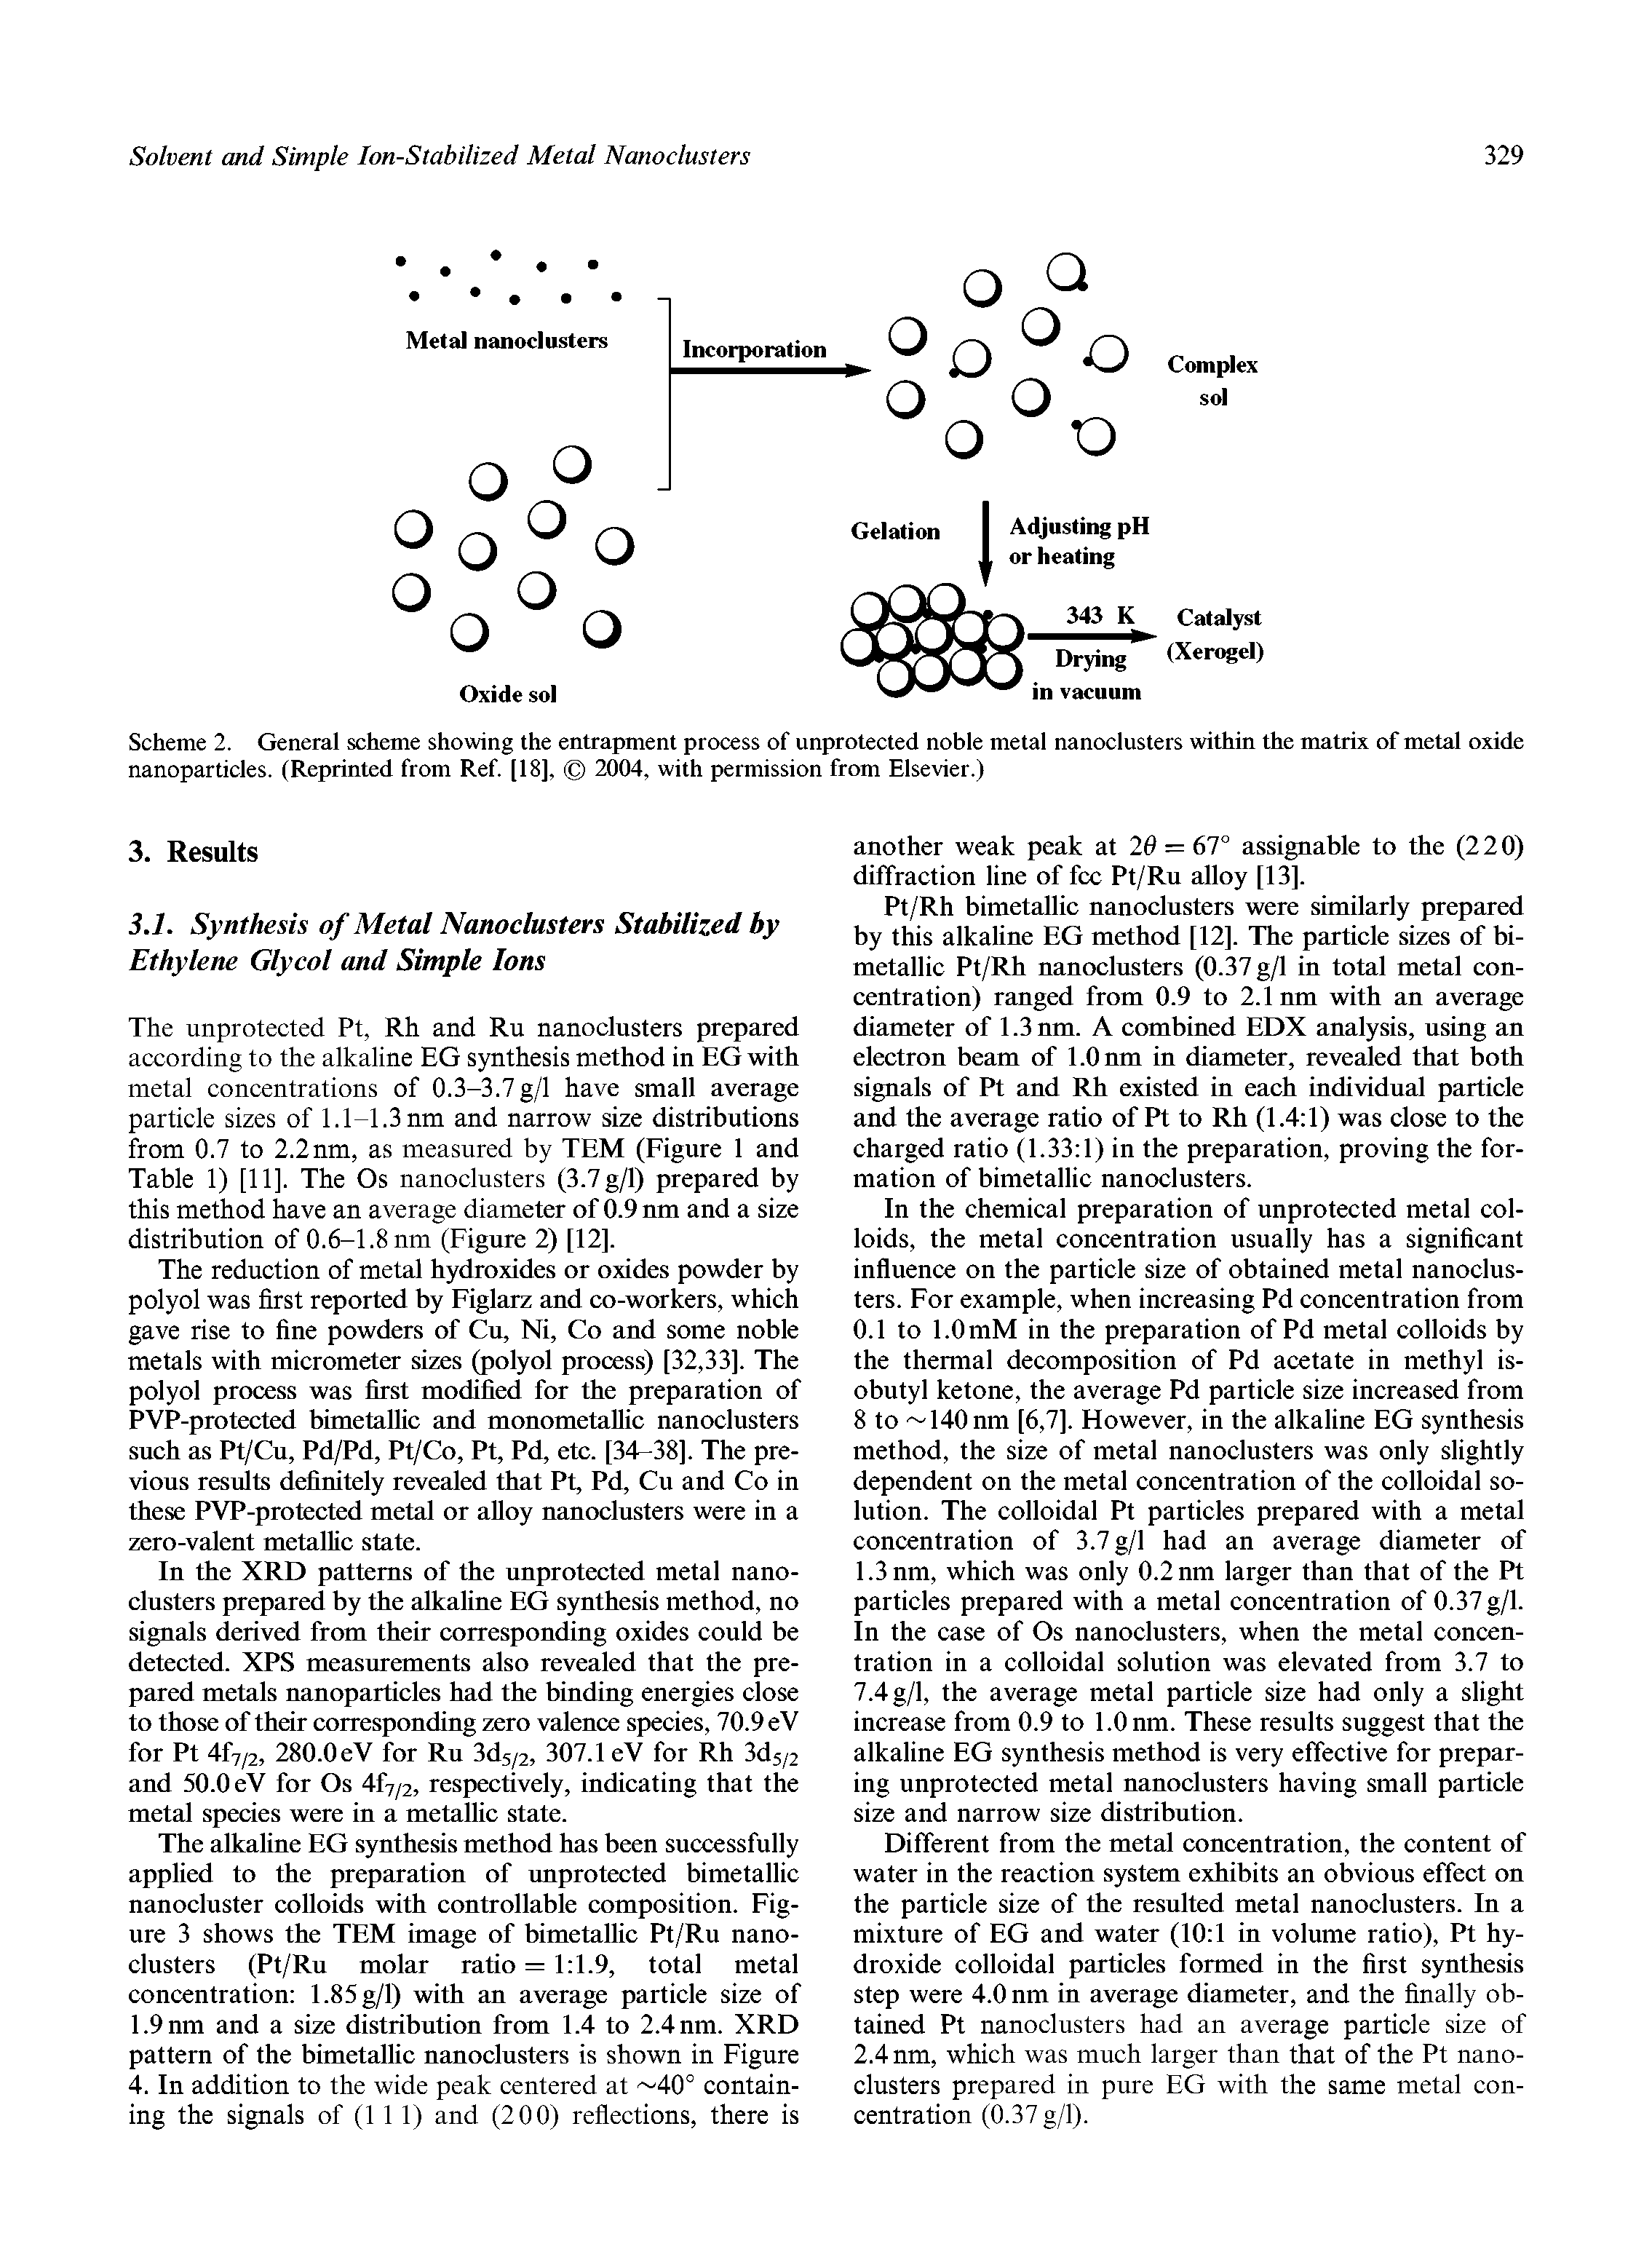 Scheme 2. General scheme showing the entrapment process of unprotected noble metal nanoclusters within the matrix of metal oxide nanoparticles. (Reprinted from Ref [18], 2004, with permission from Elsevier.)...